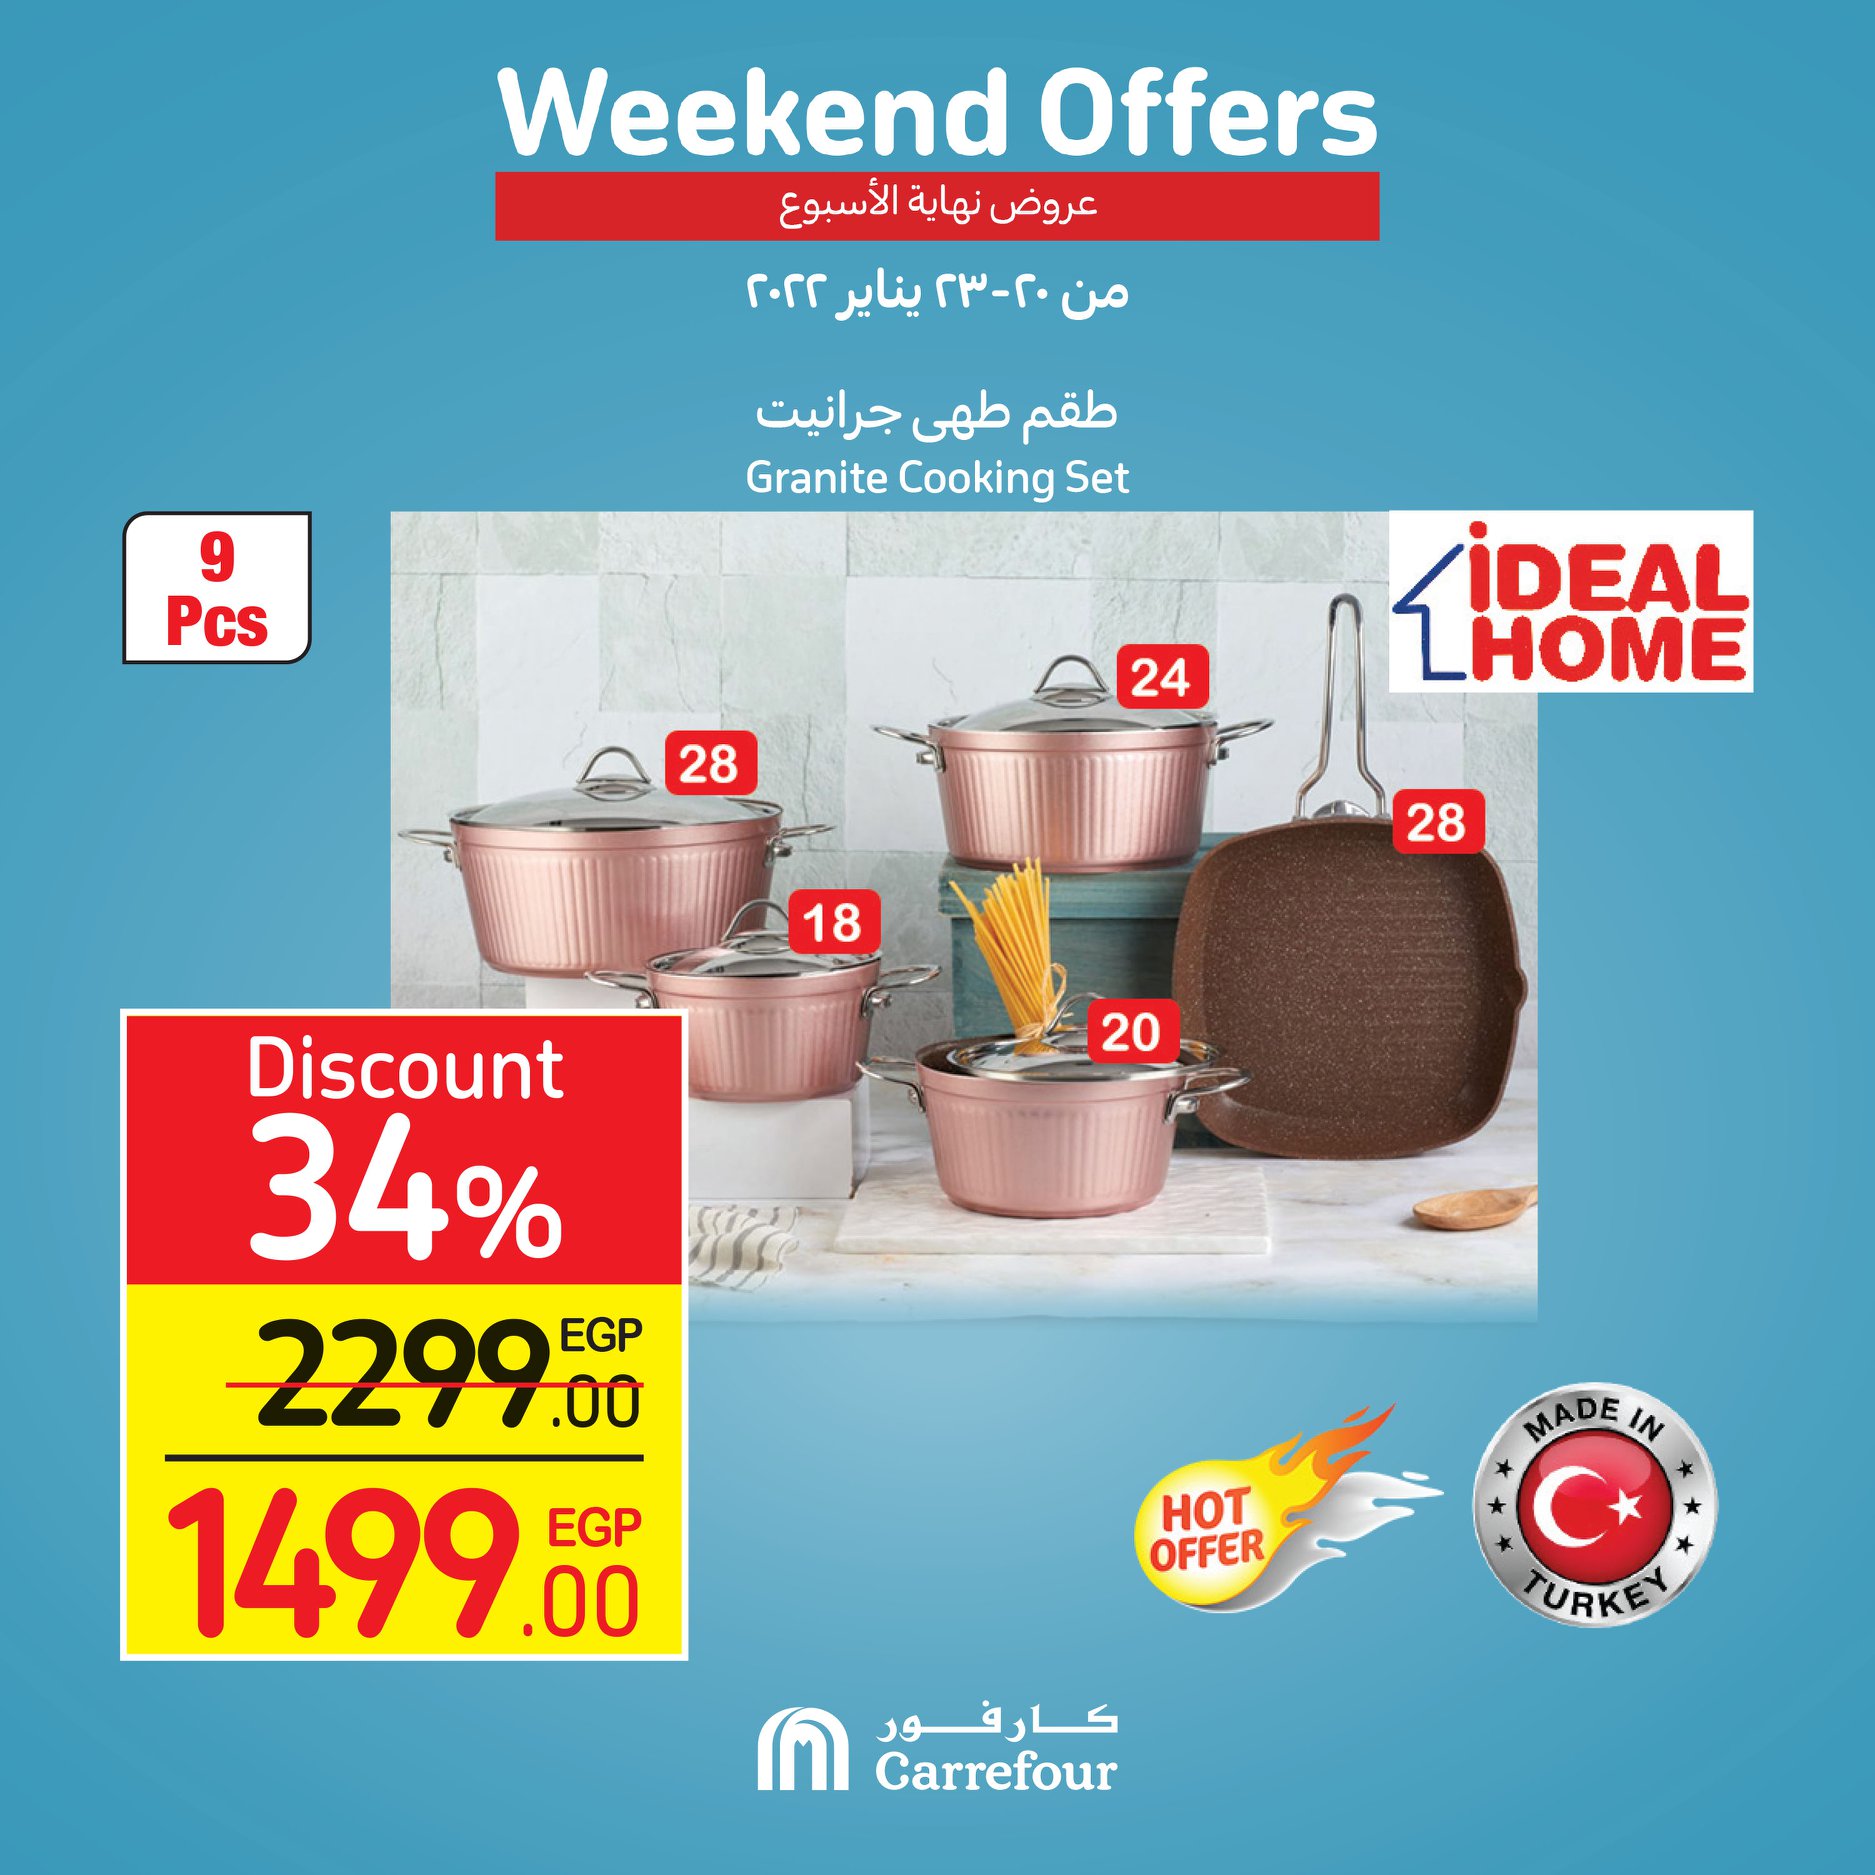 Watch Carrefour's gifts and surprises at Weekend and dirt cheap prices 23